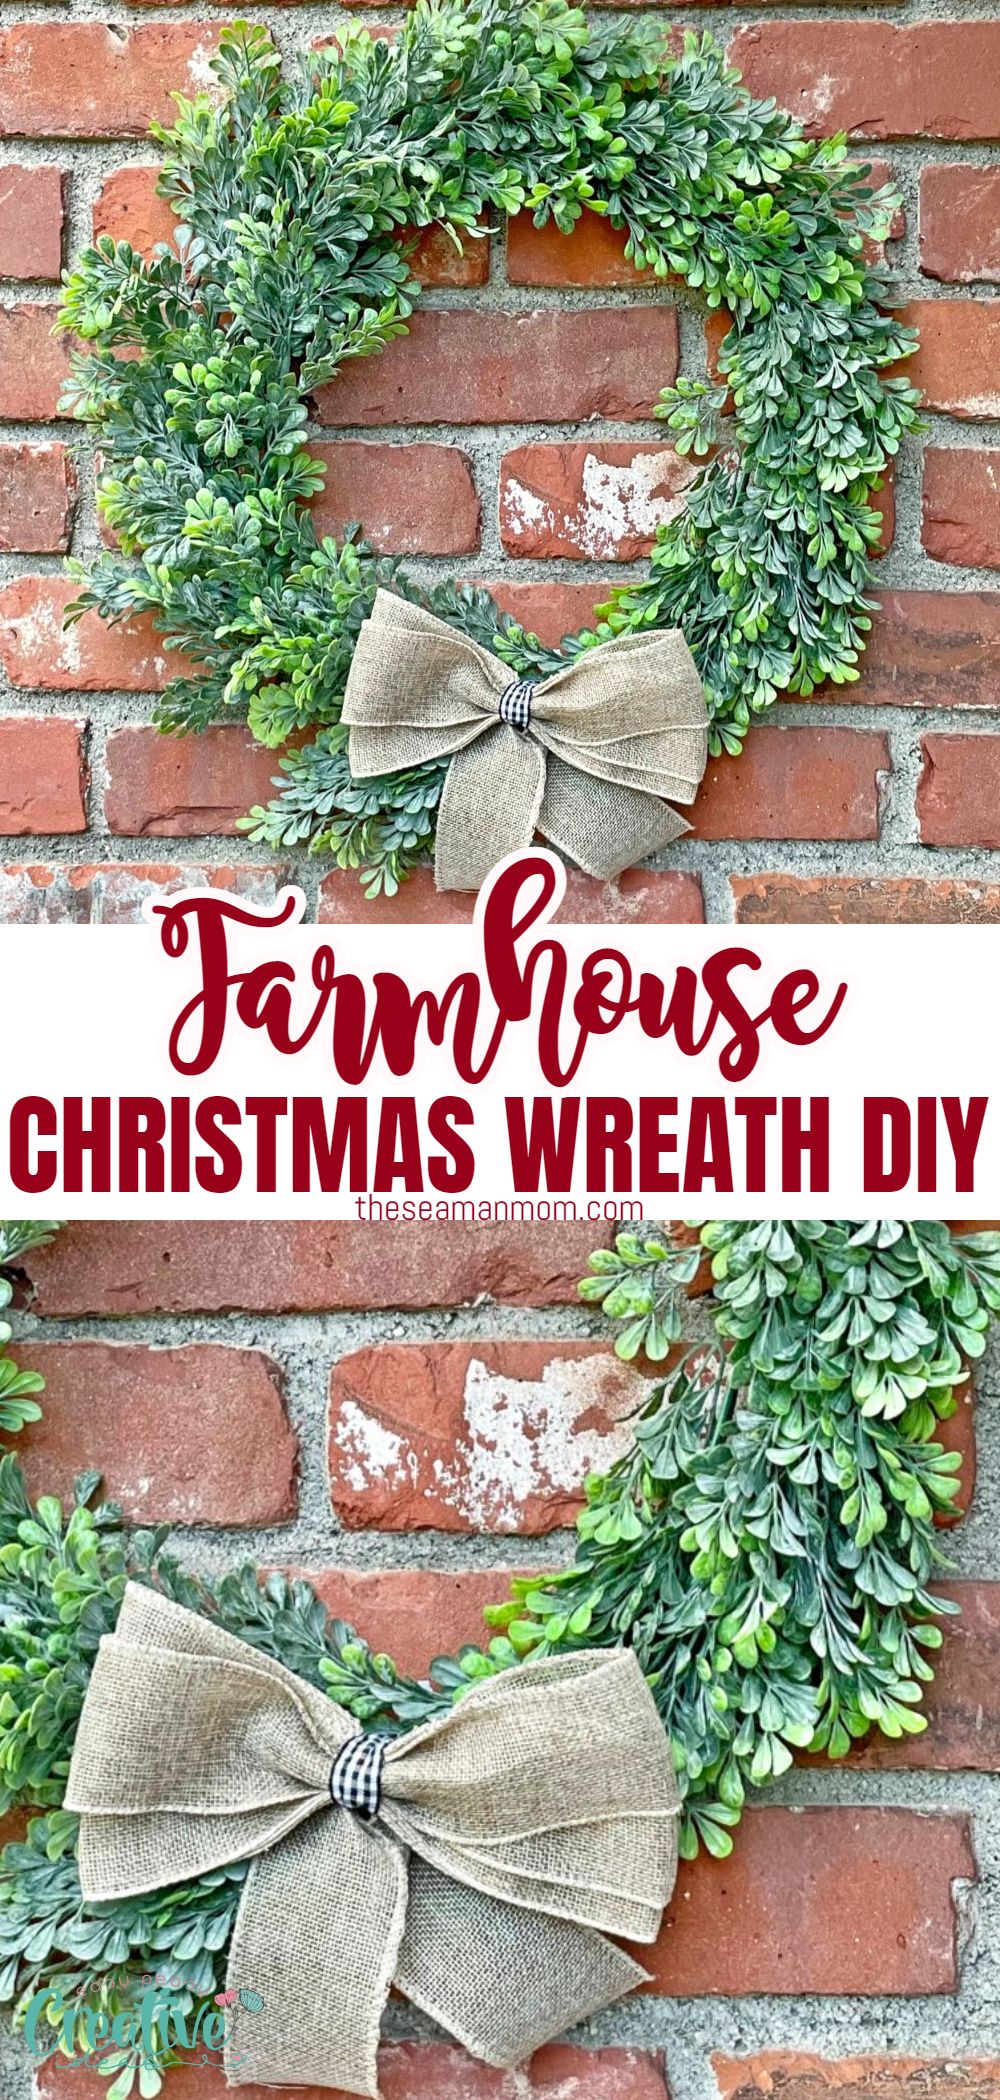 Boxwood wreaths are one of my favorite ways to add farmhouse charm to my front door during the holidays. But there’s no reason to spend a fortune on a real boxwood wreath when you can make your own at home for $10! Using supplies from Wal-Mart and Dollar Tree, make your own DIY Christmas wreath for a fraction of the price of a real one using this easy tutorial. via @petroneagu